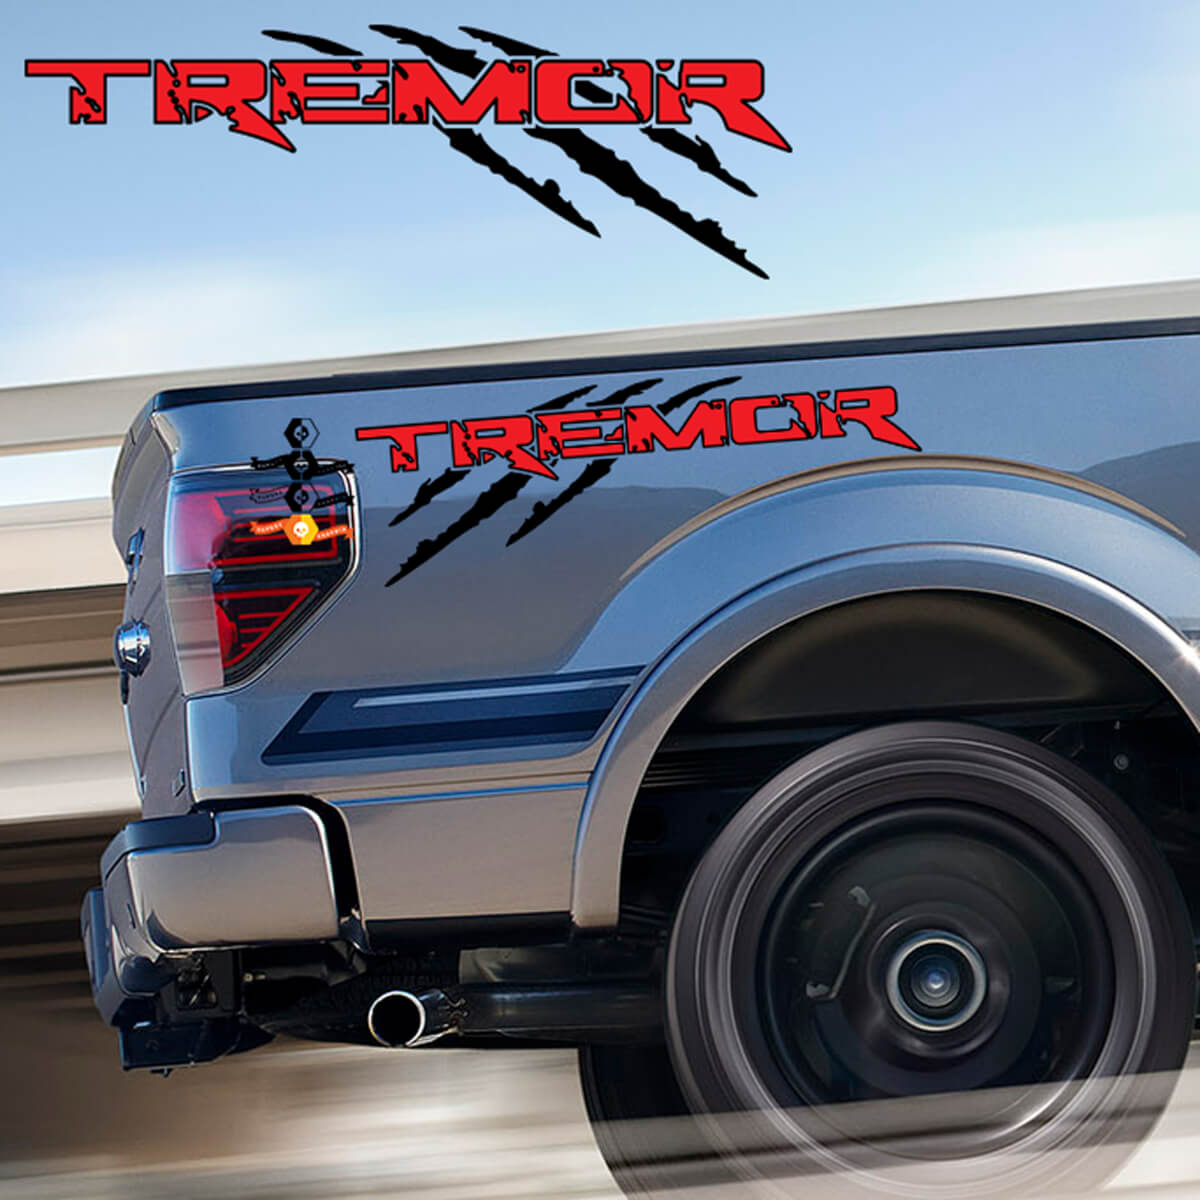 Decal for Ford F-150 Tremor Scratches Raptor Style with Outline - Offroad Stickers Truck Bed Side
